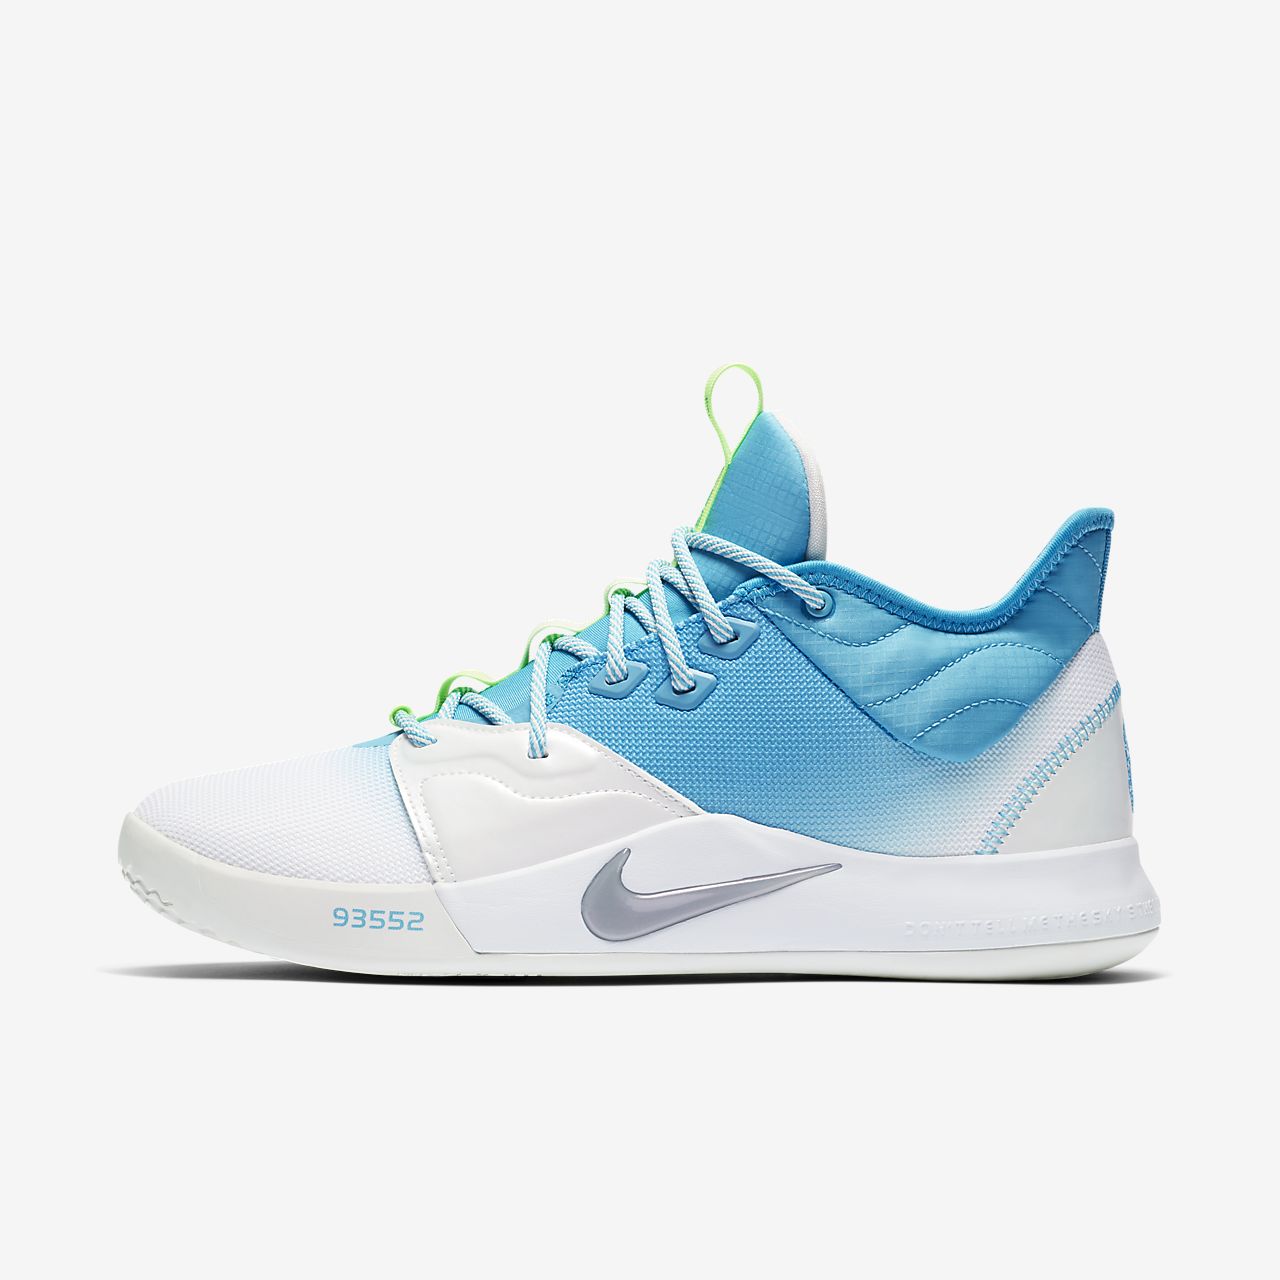 paul george playstation shoes price